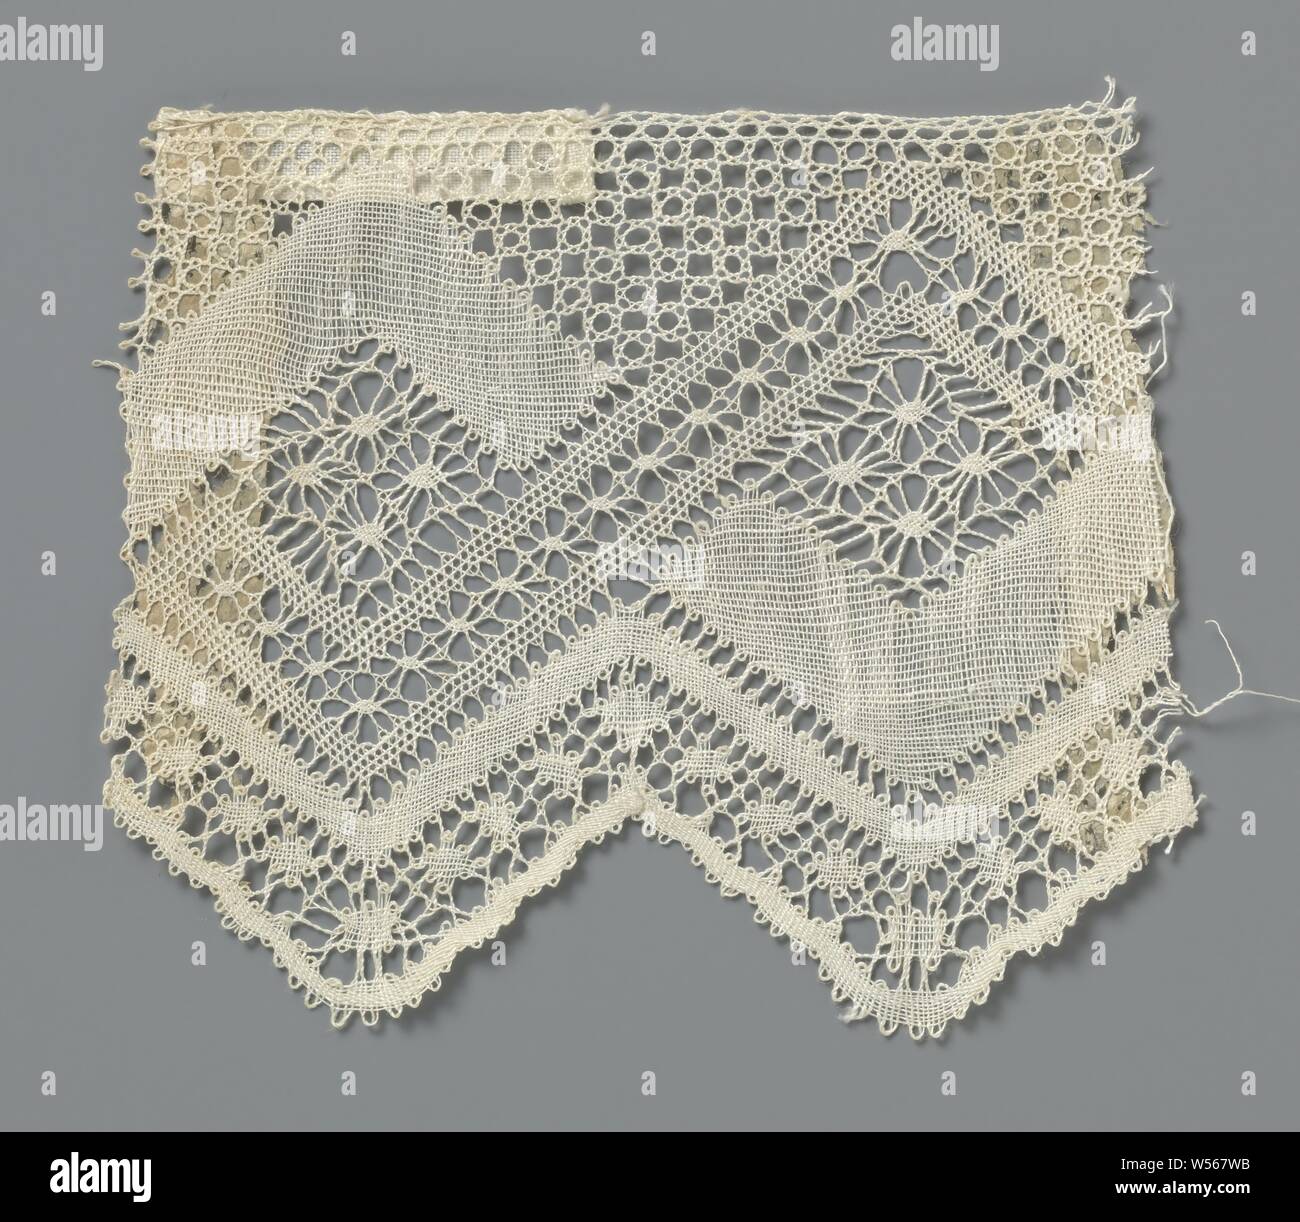 Strip of spool lace with diamonds between double zigzag band, Natural spool of lace strip, lace. The pattern consists of intersecting bands that cross the strip with a zigzag movement, creating diamonds and triangles. One band is made in densely worked linen stroke, the over-cutting decorative band is made in net stroke with snowflakes in between. Immediately below, two narrower and continuous zigzag webs with larger snowflakes in between form the triangular scallops along the underside of the strip. The zigzag webs are connected to each other along the top of the strip by a mesh ground. Stock Photo